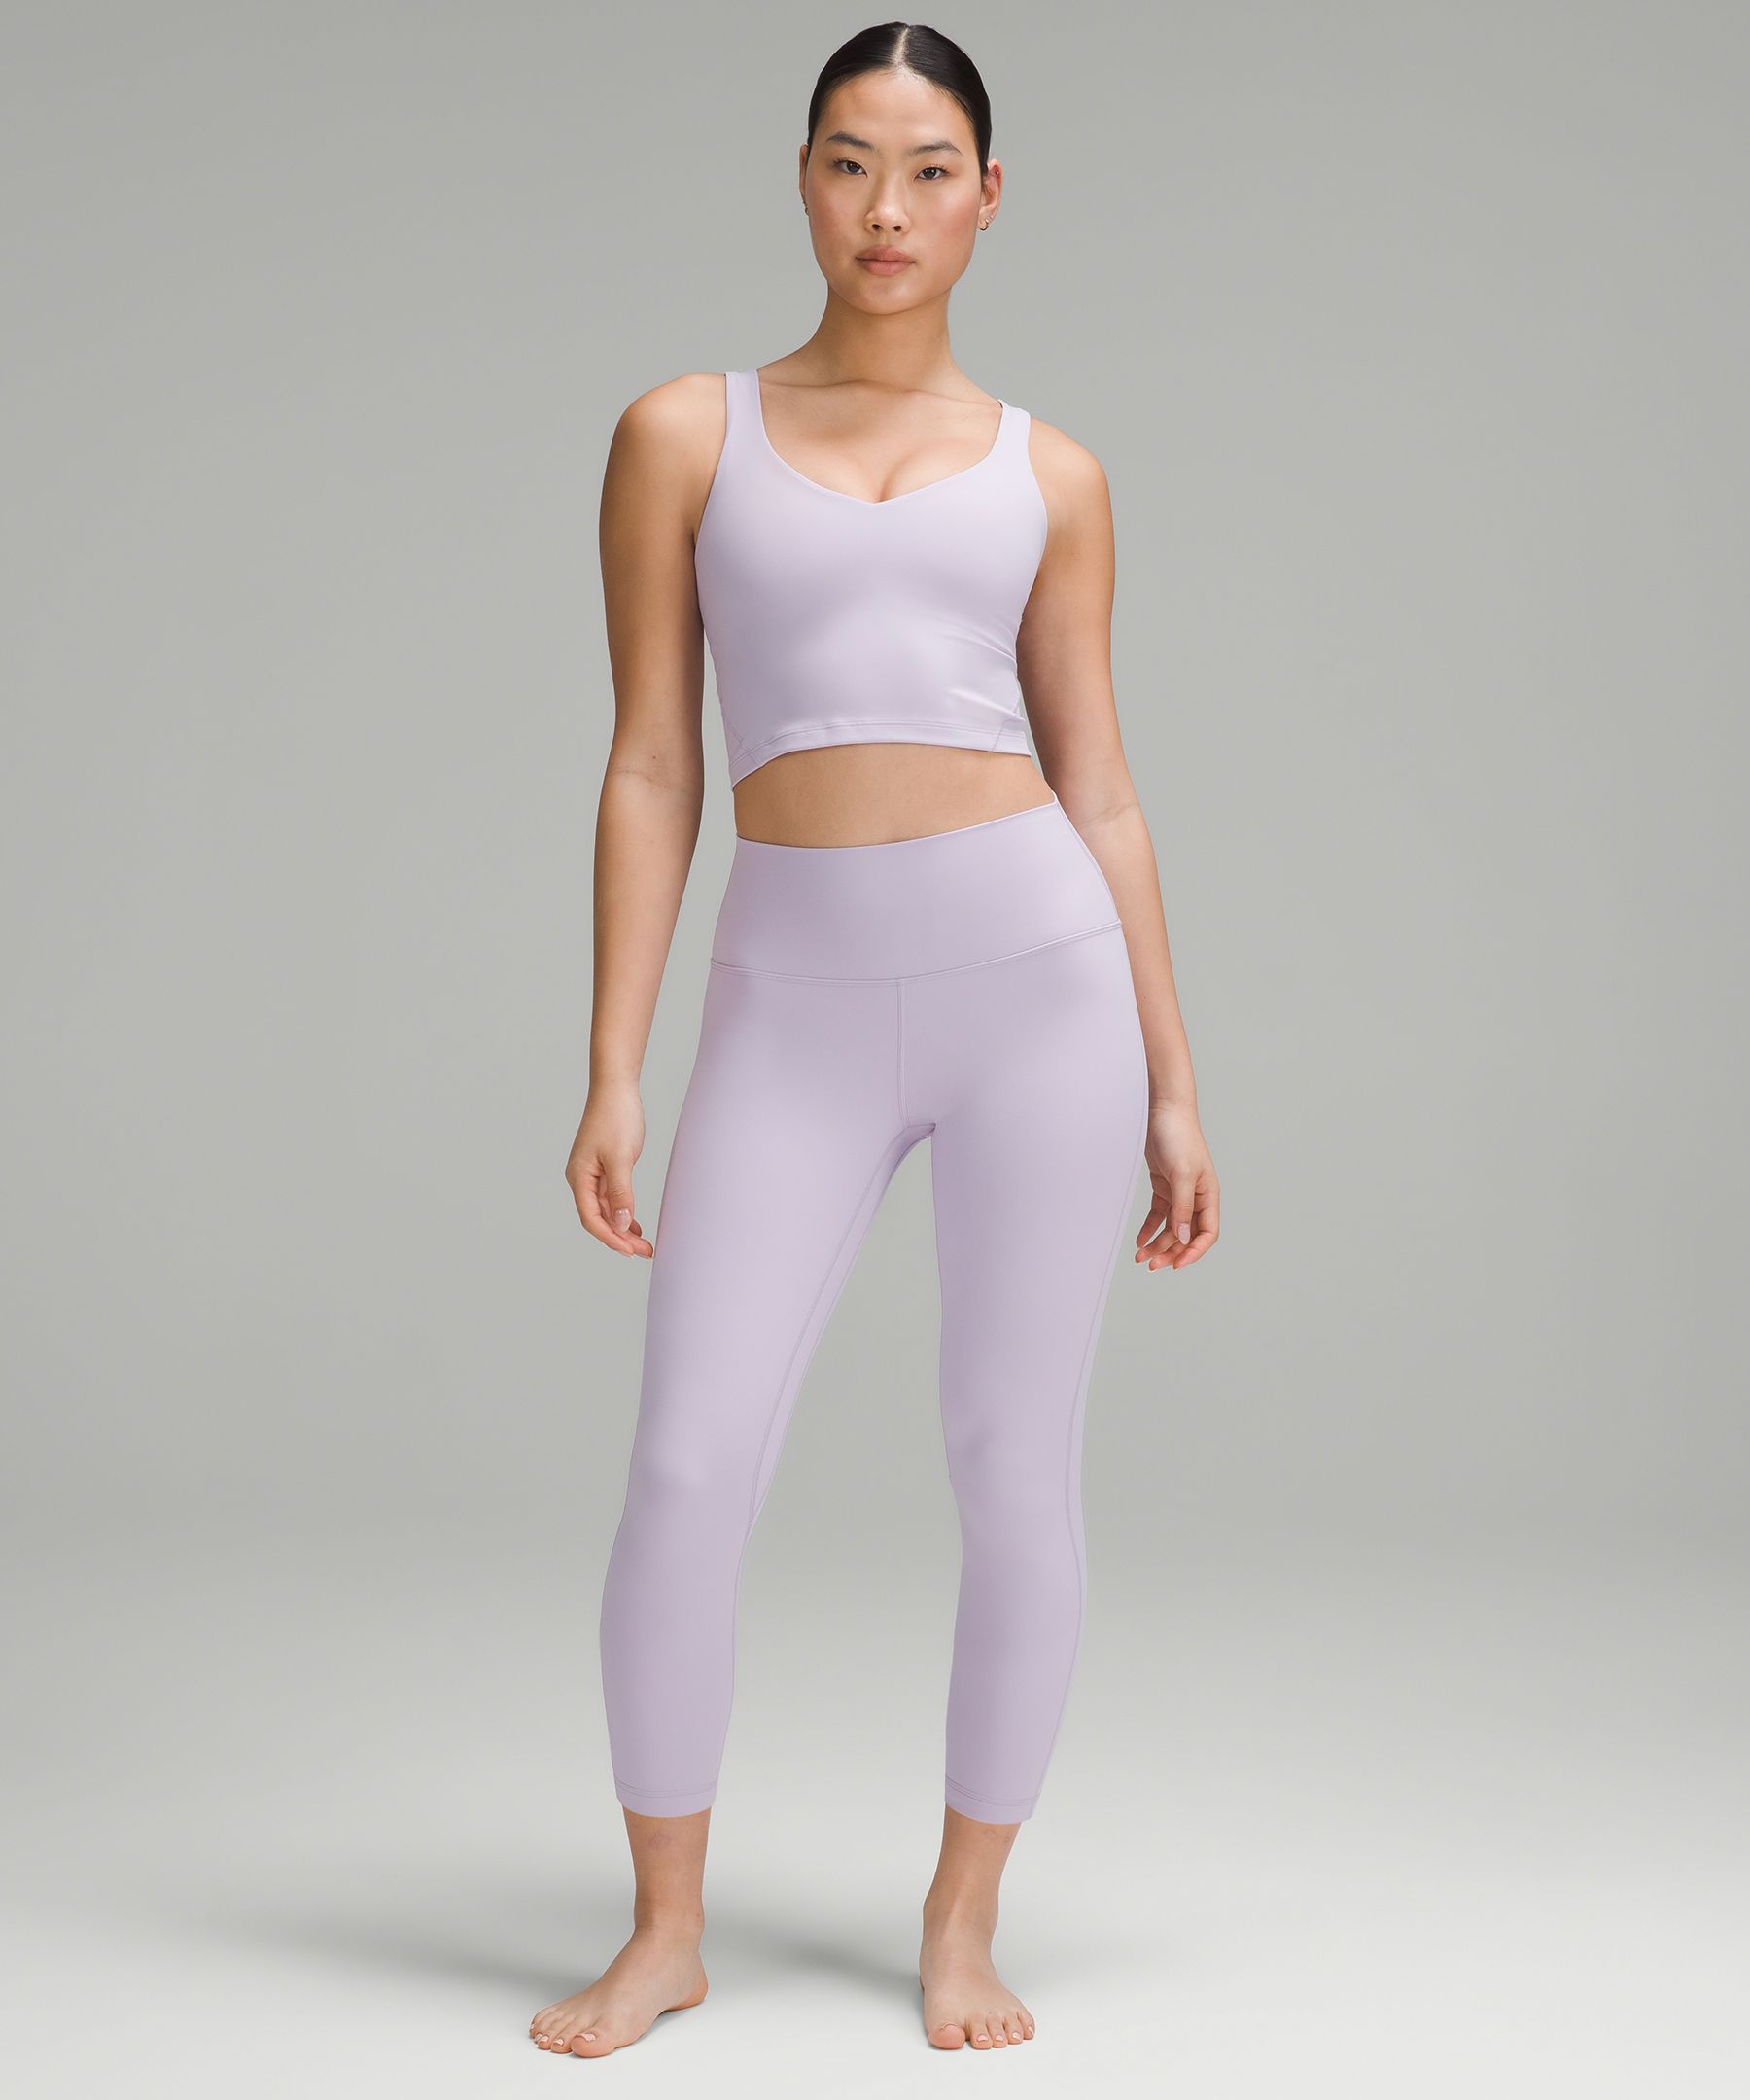 lululemon New Zealand - Get wrapped up in Nulu™ fabric that feels like  wearing nothing. The soft, smooth All It Takes Tank and Align Pant in new  Water Drop colour is made